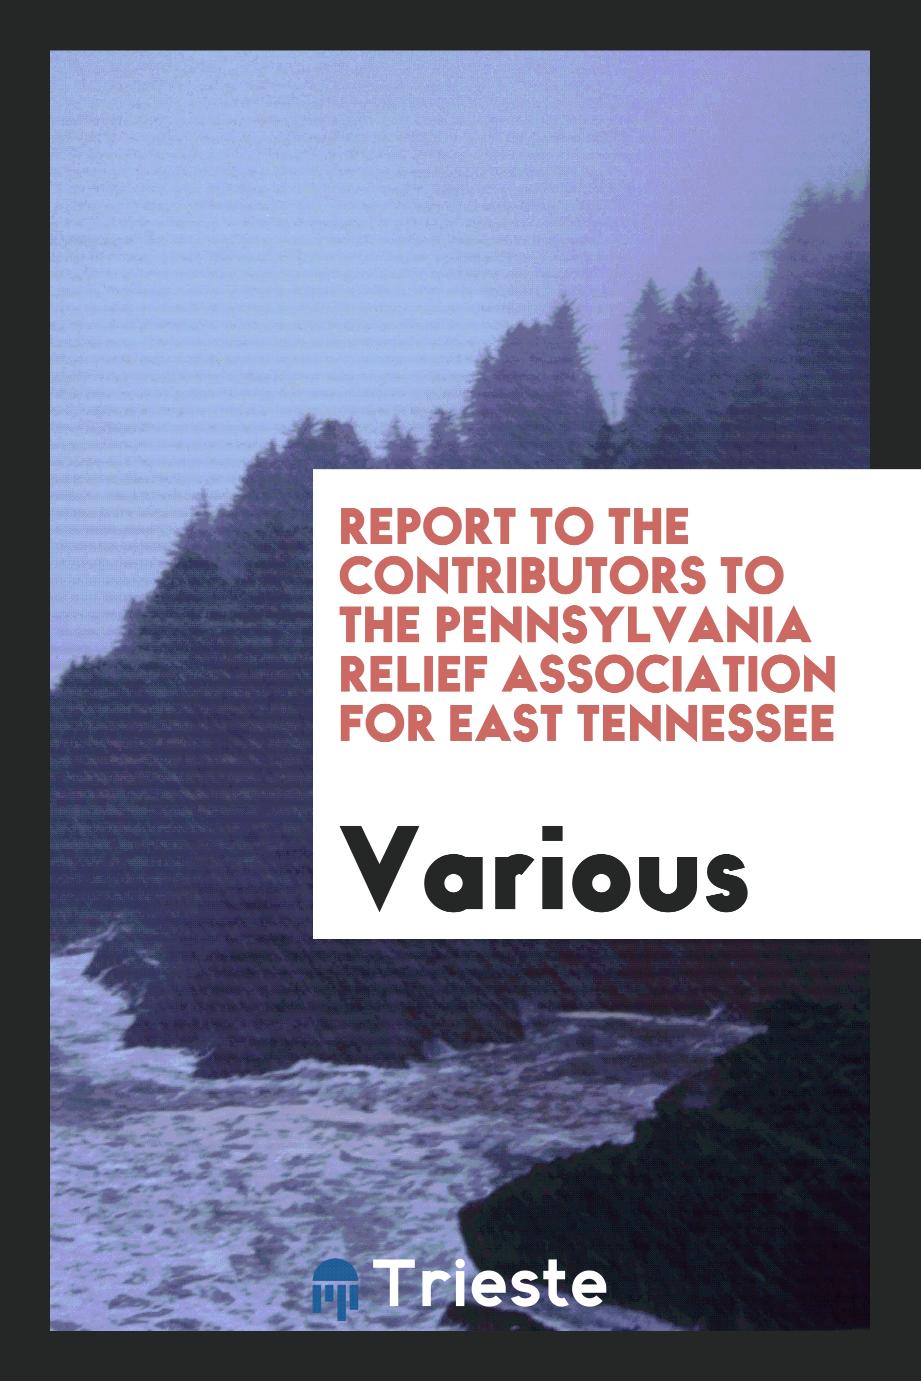 Report to the contributors to the Pennsylvania relief association for East Tennessee